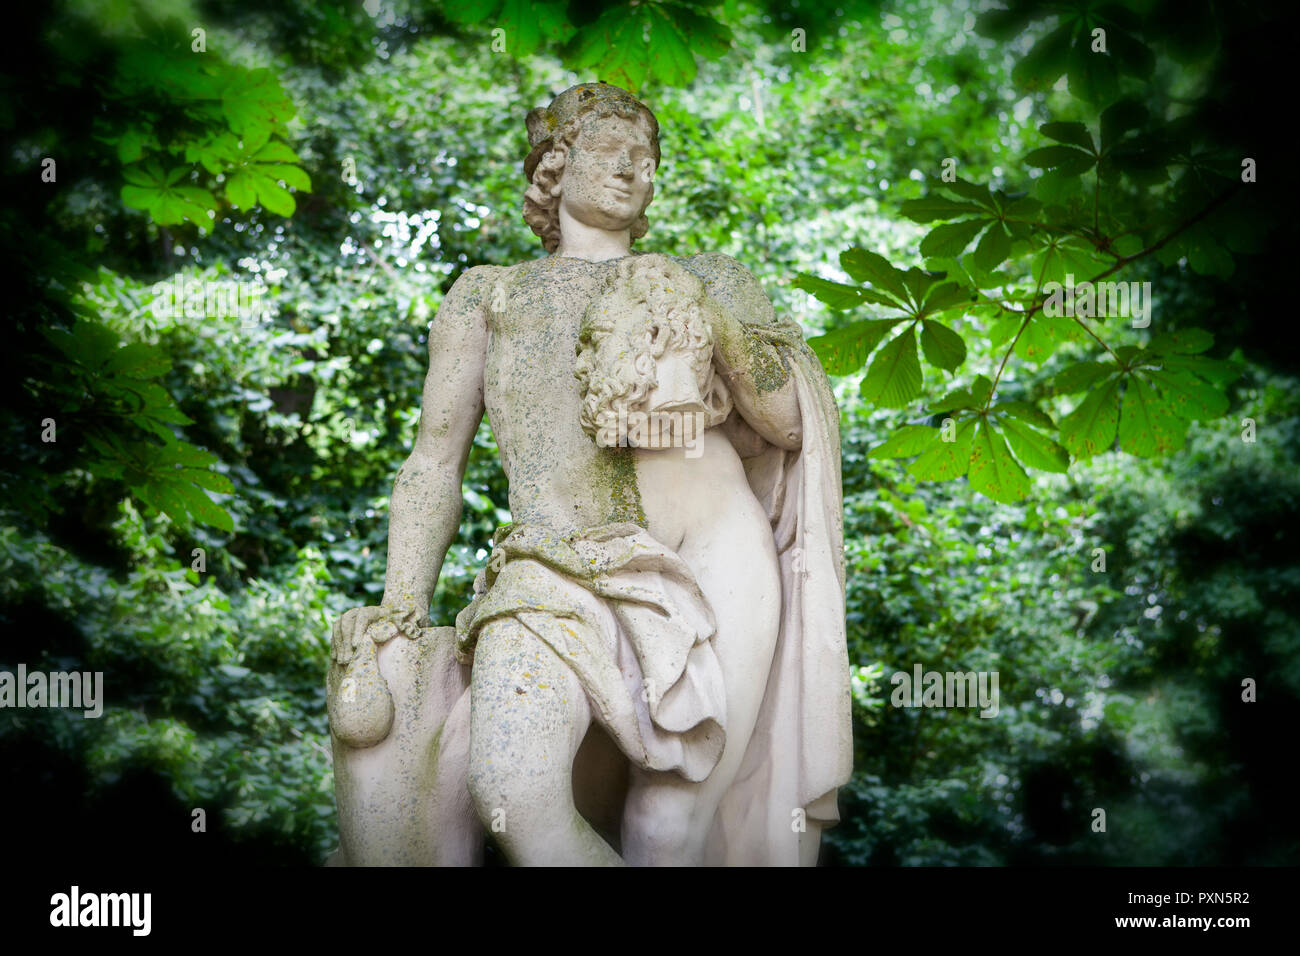 Sculpture of Mercury at Nordkirchen Moated Palace, Germany Stock Photo